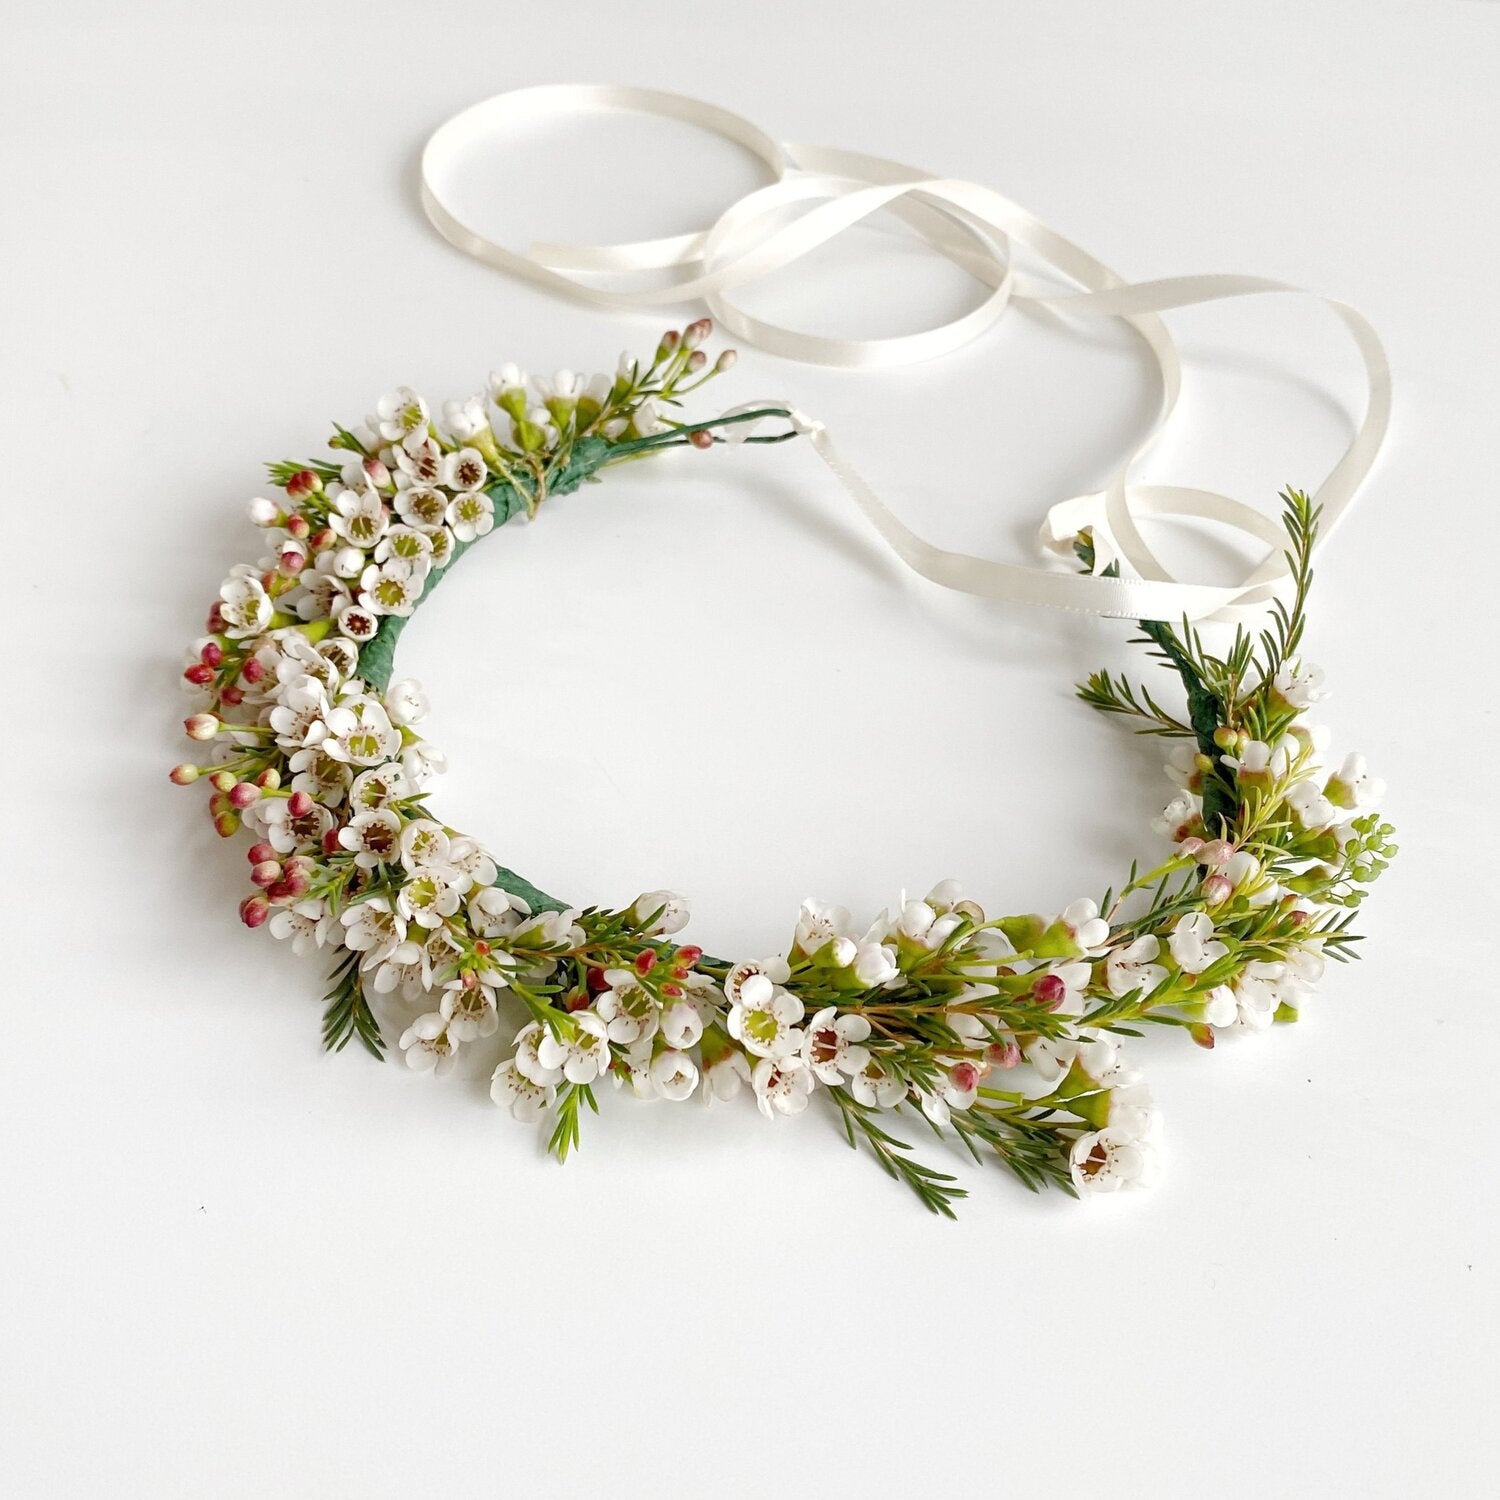 Flower crown tied with white satin ribbon featuring varying white flowers. Arranged in Memphis, TN by Everbloom Design.